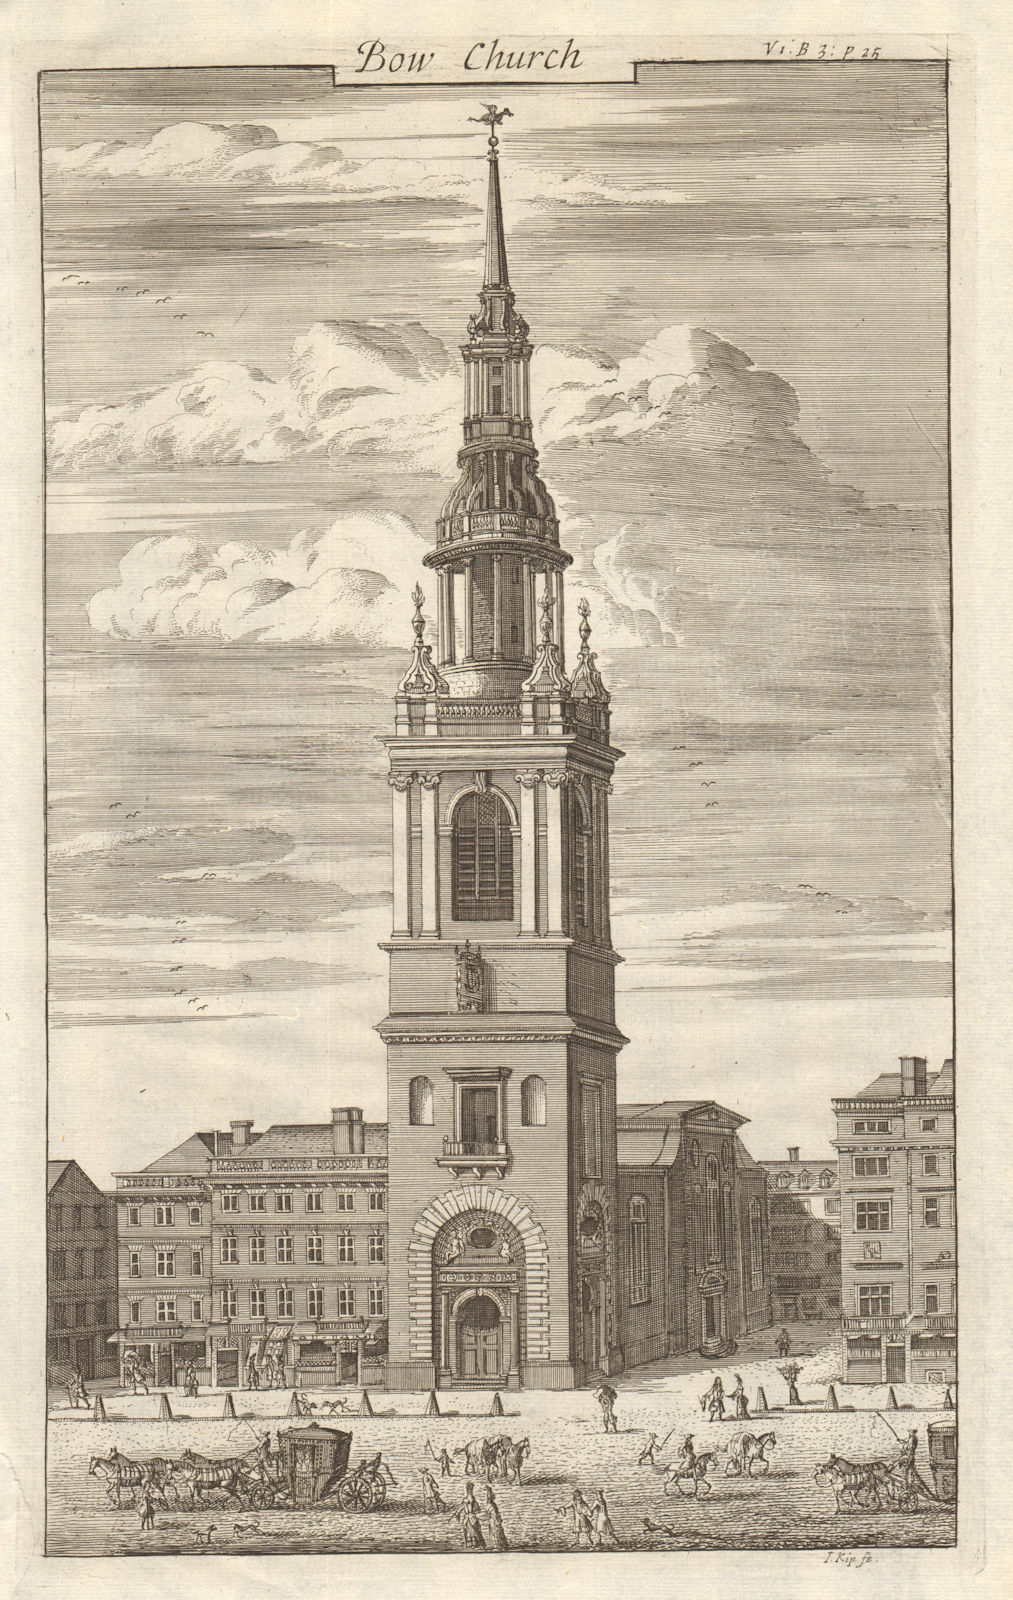 'Bow Church'. St Mary-le-Bow, Cheapside, City of London. STOW/STRYPE 1720